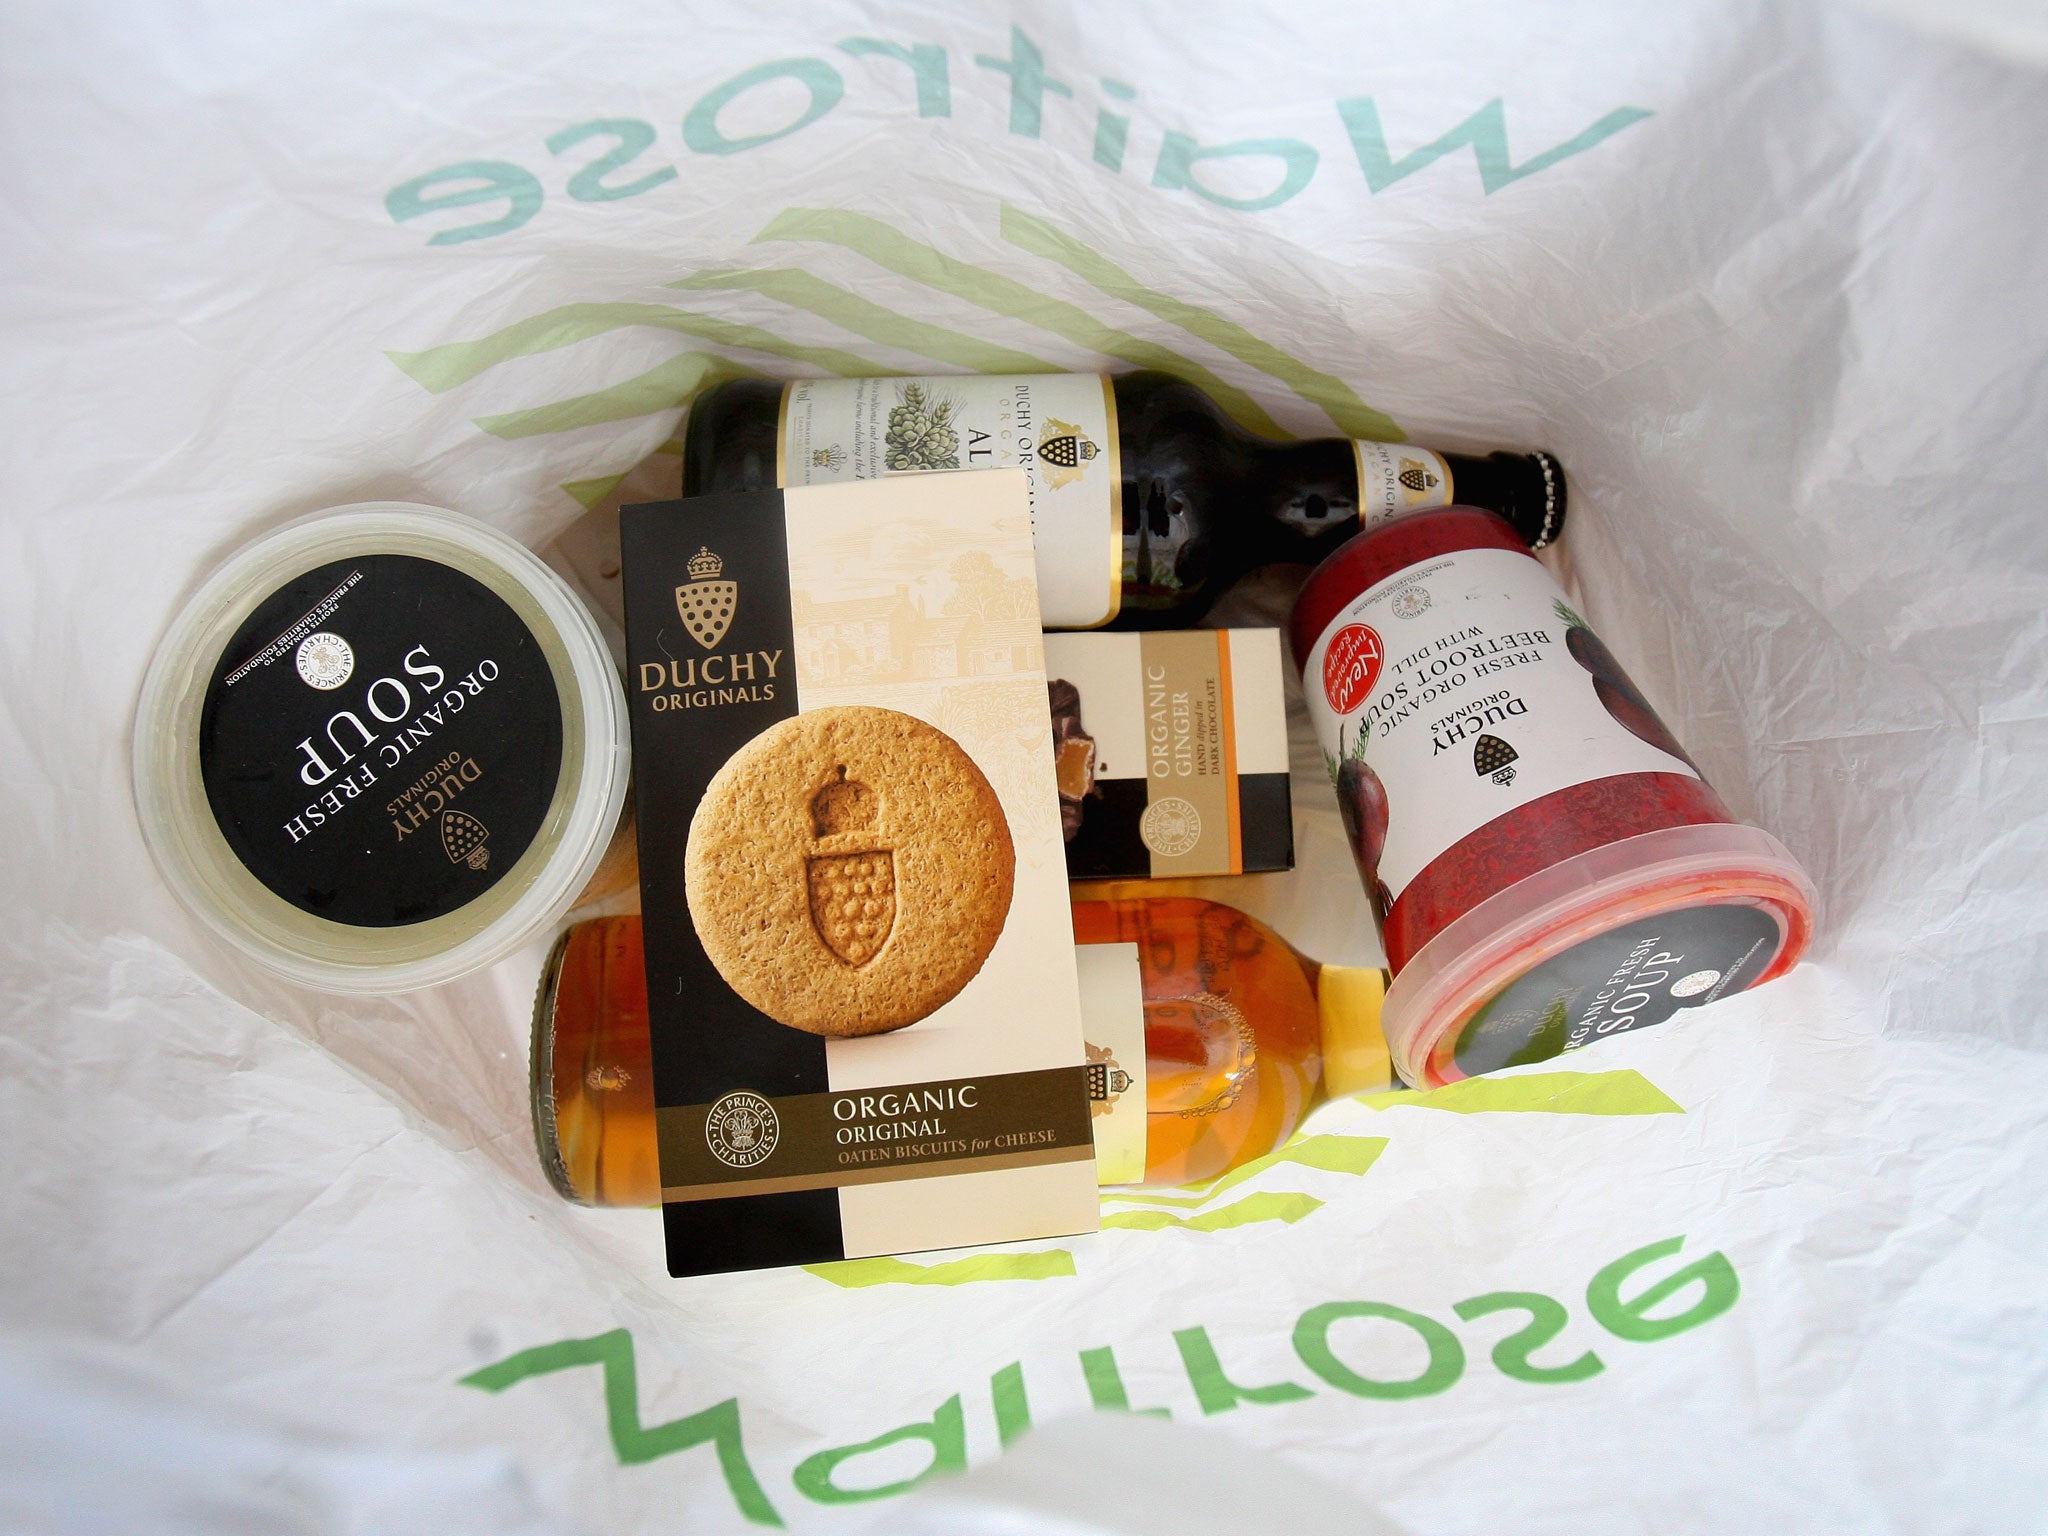 Duchy Originals products are placed in a Waitrose shopping bag on September 7, 2009 in London, England.